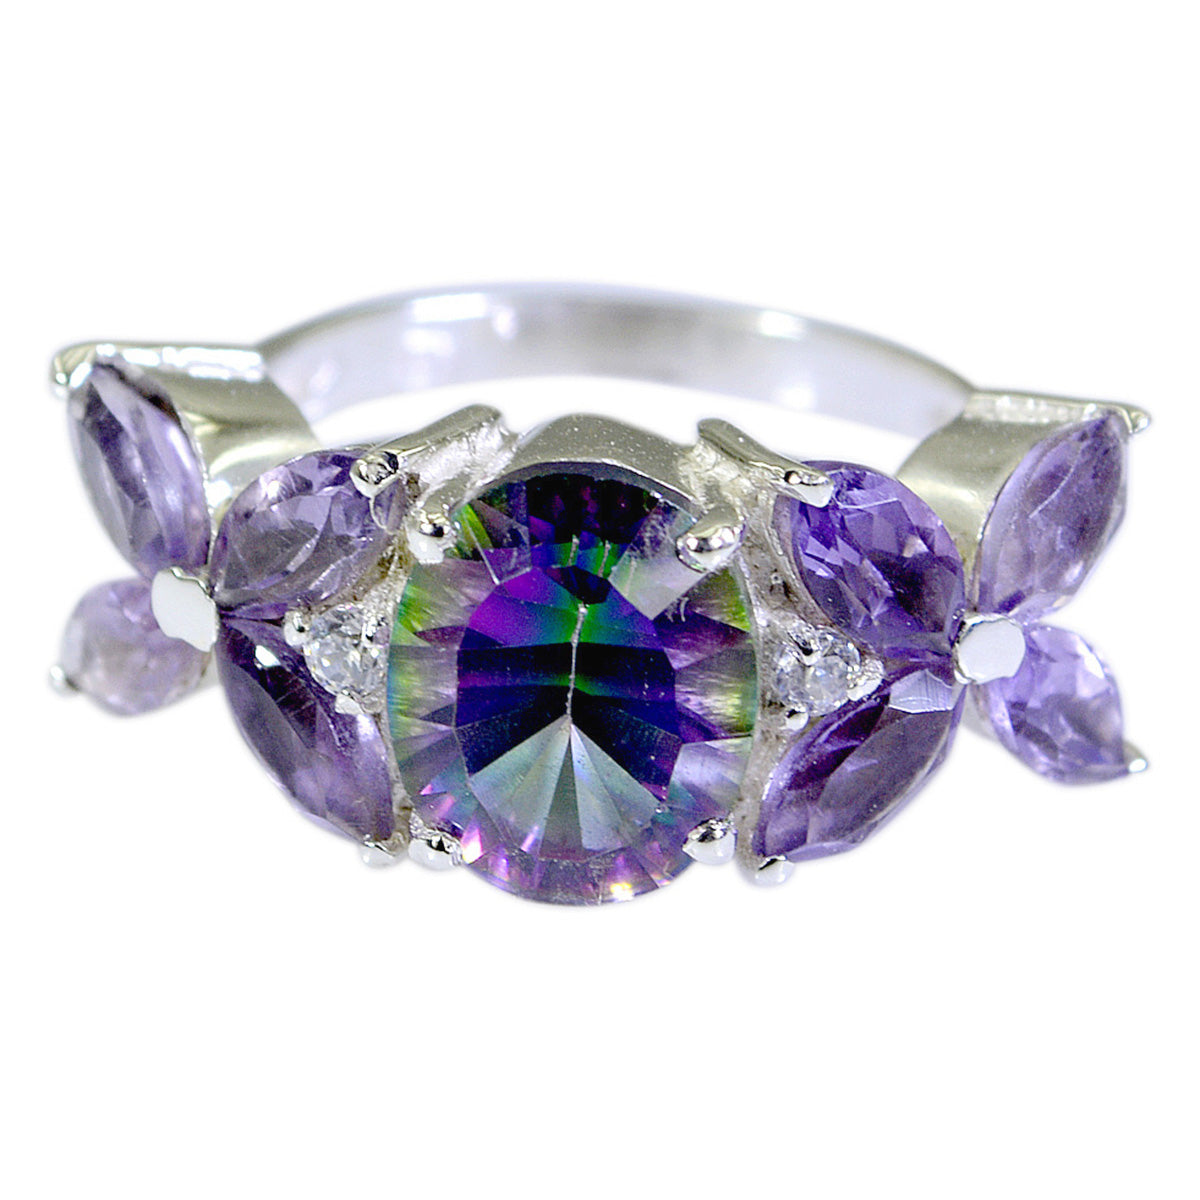 Attractive Gem Mystic Quartz Silver Ring Cremation Jewelry For Ashes